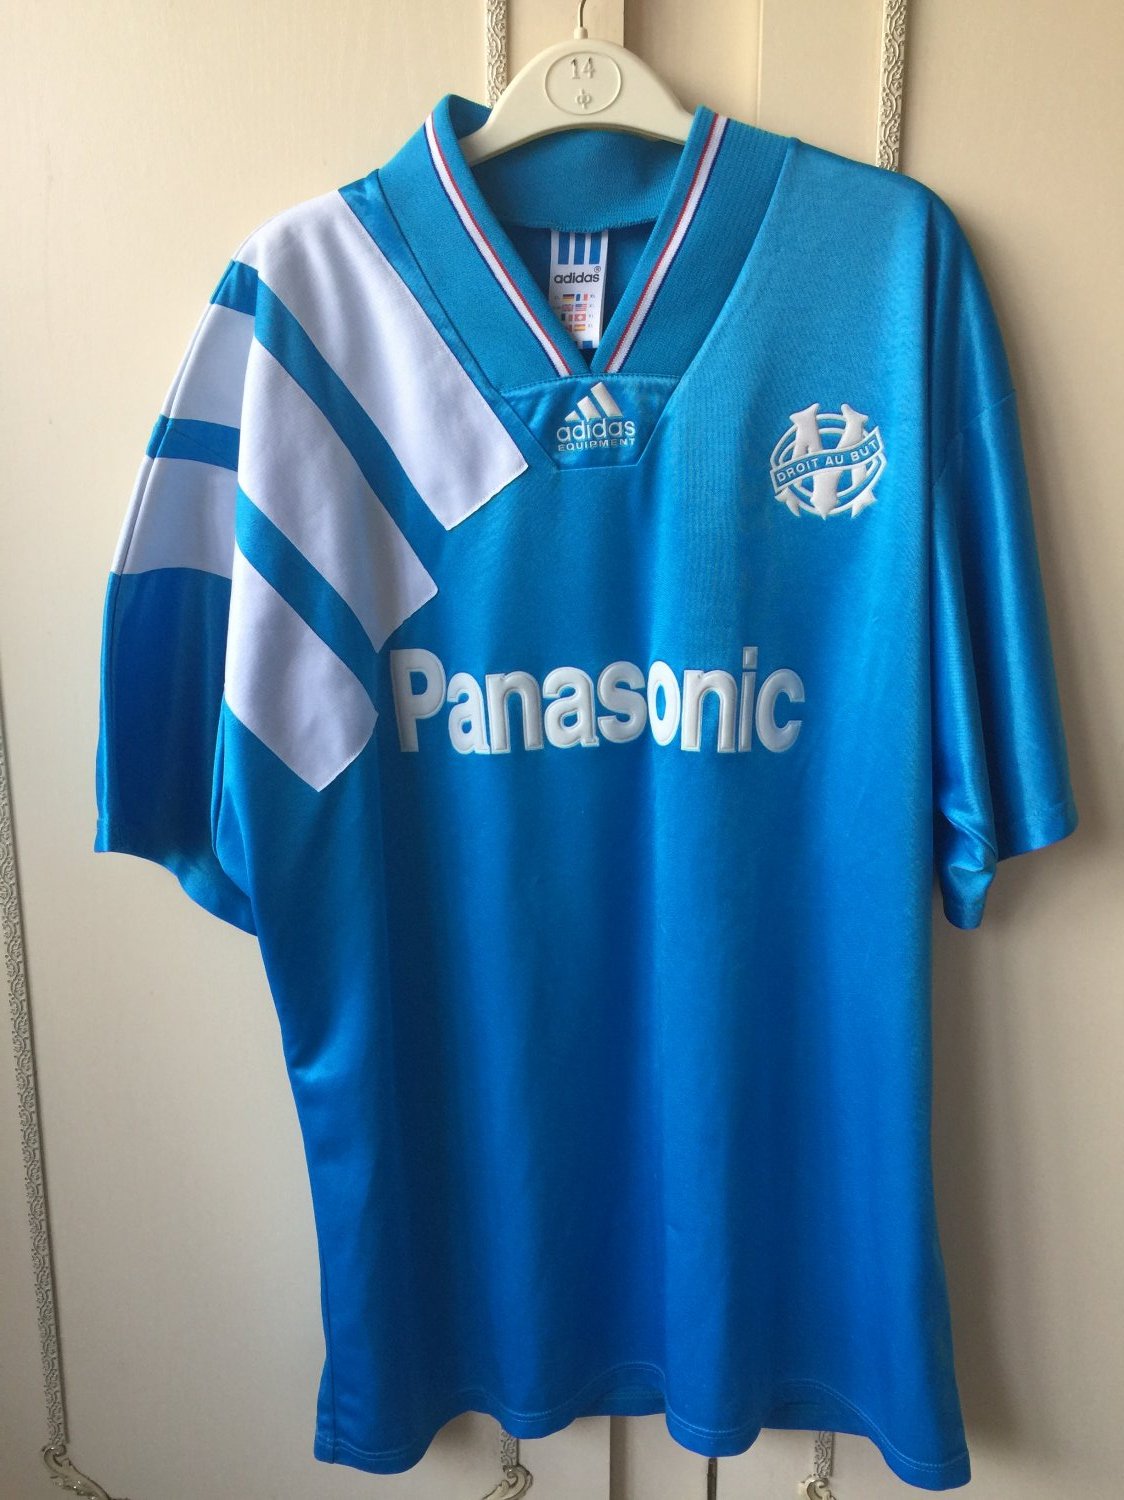 Basket Opposite poultry Olympique Marseille Away football shirt 1993 - 1994. Sponsored by Panasonic